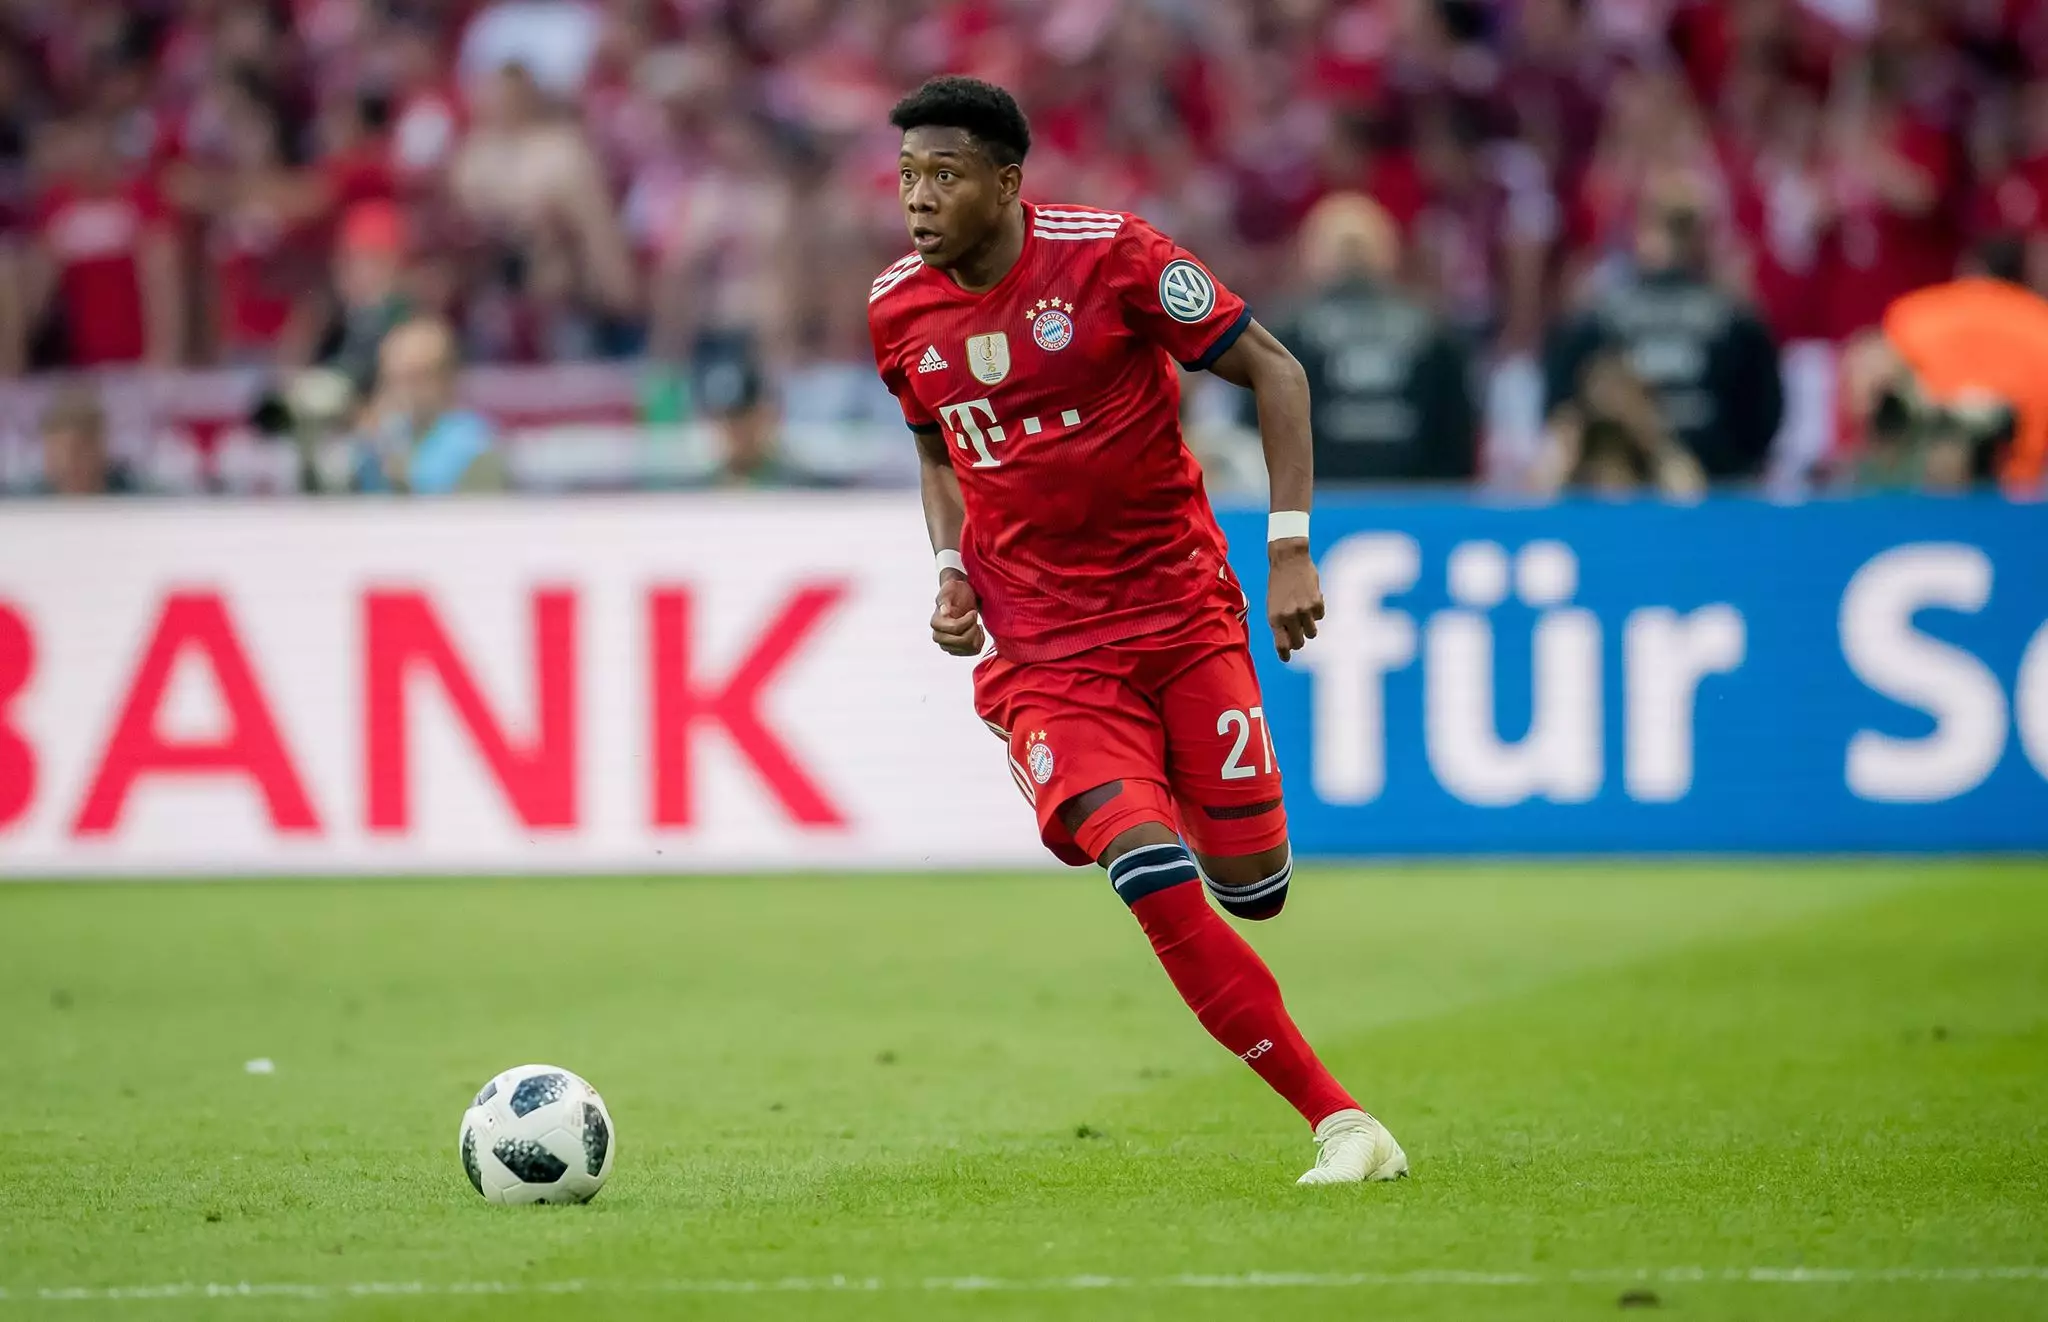 Alaba in action for Bayern Munich. Image: PA